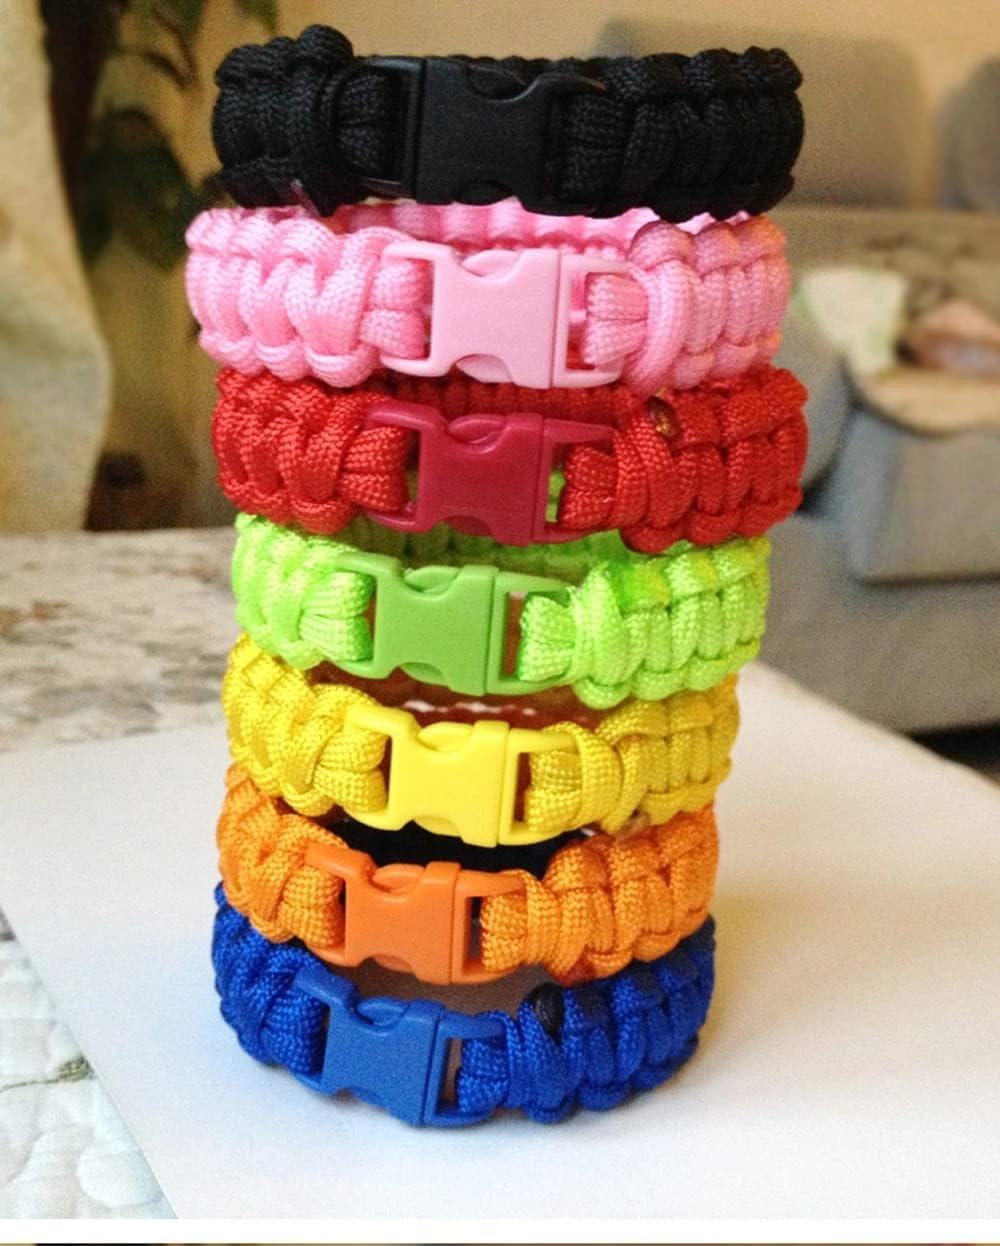 Colorful Contoured 5/8 Side Release Buckles For Paracord Bracelet Survival  Kit Emergency Plastic Buckle - Buy Colorful Contoured 5/8 Side Release  Buckles For Paracord Bracelet Survival Kit Emergency Plastic Buckle Product  on